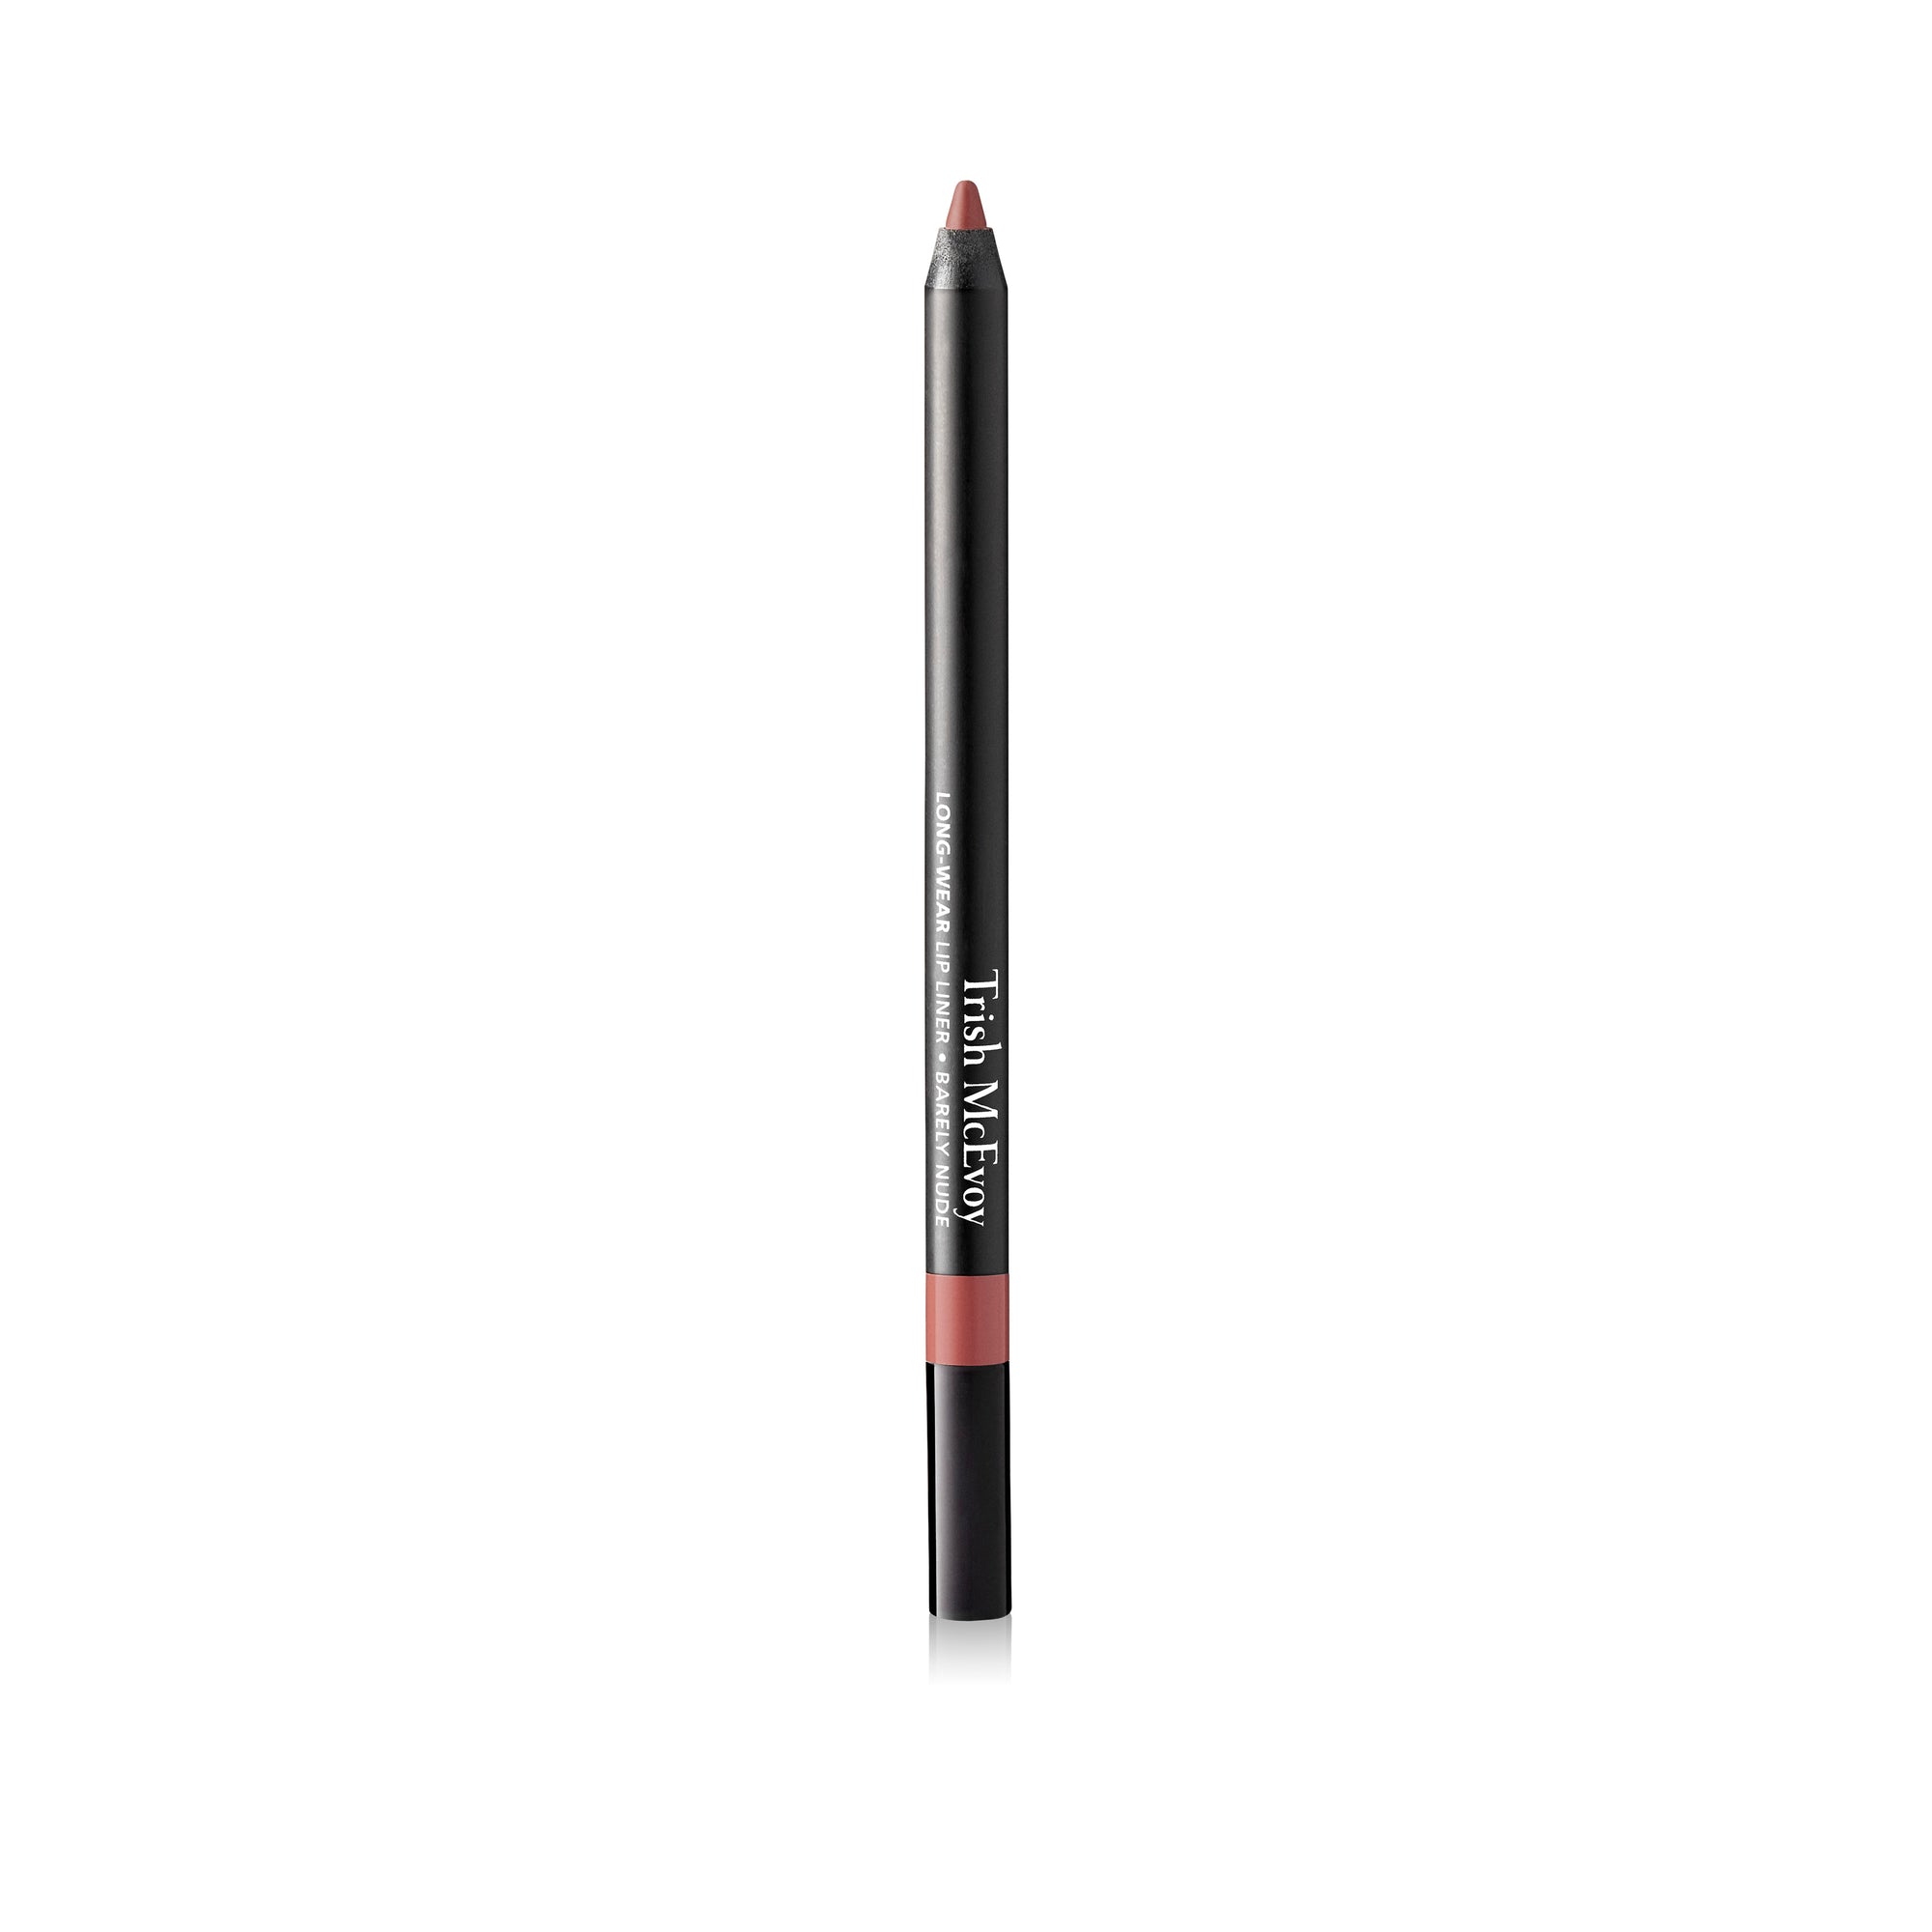 Trish McEvoy Long Wear Lip Liner Barely There